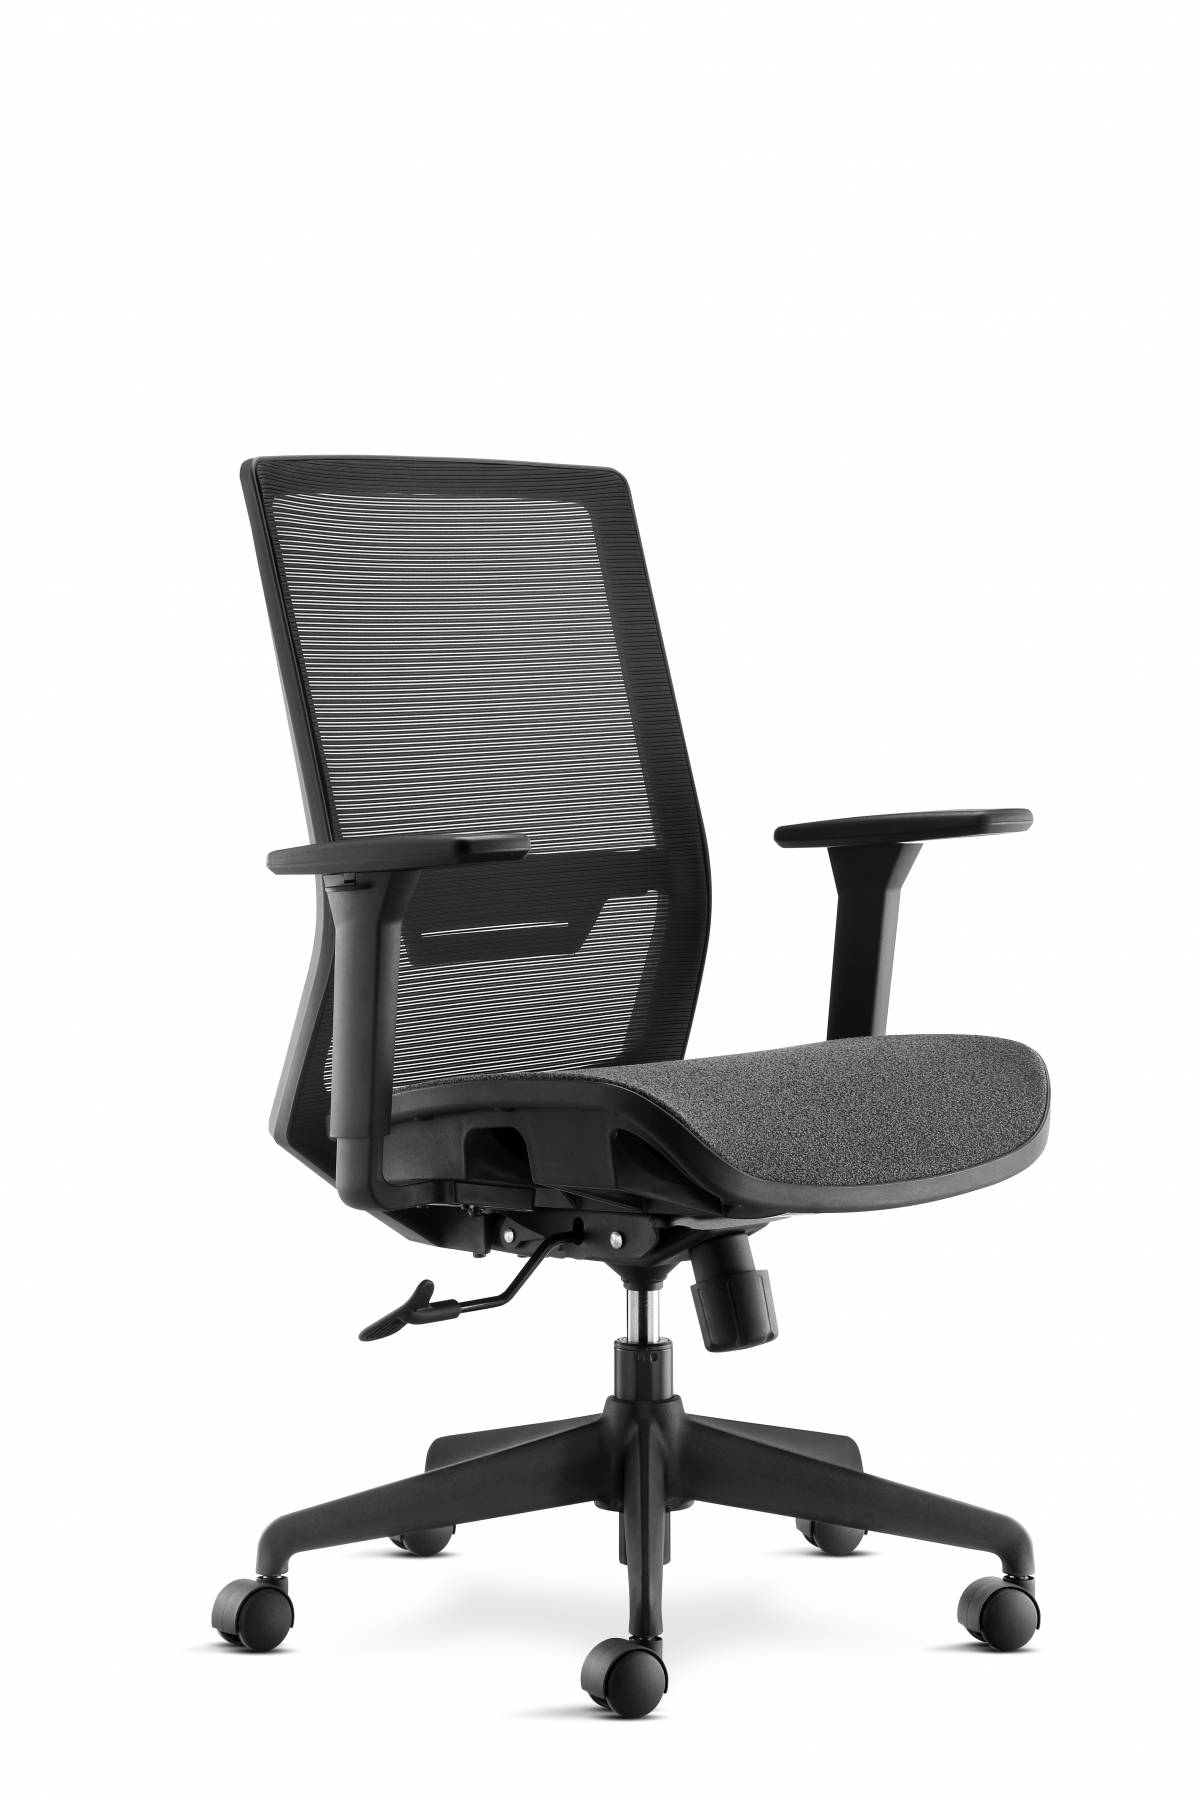 why my nice office chair with mesh seat is easy to get loose but cost is expensive-NOWA-China Office Furniture, China Custom Made Furniture,